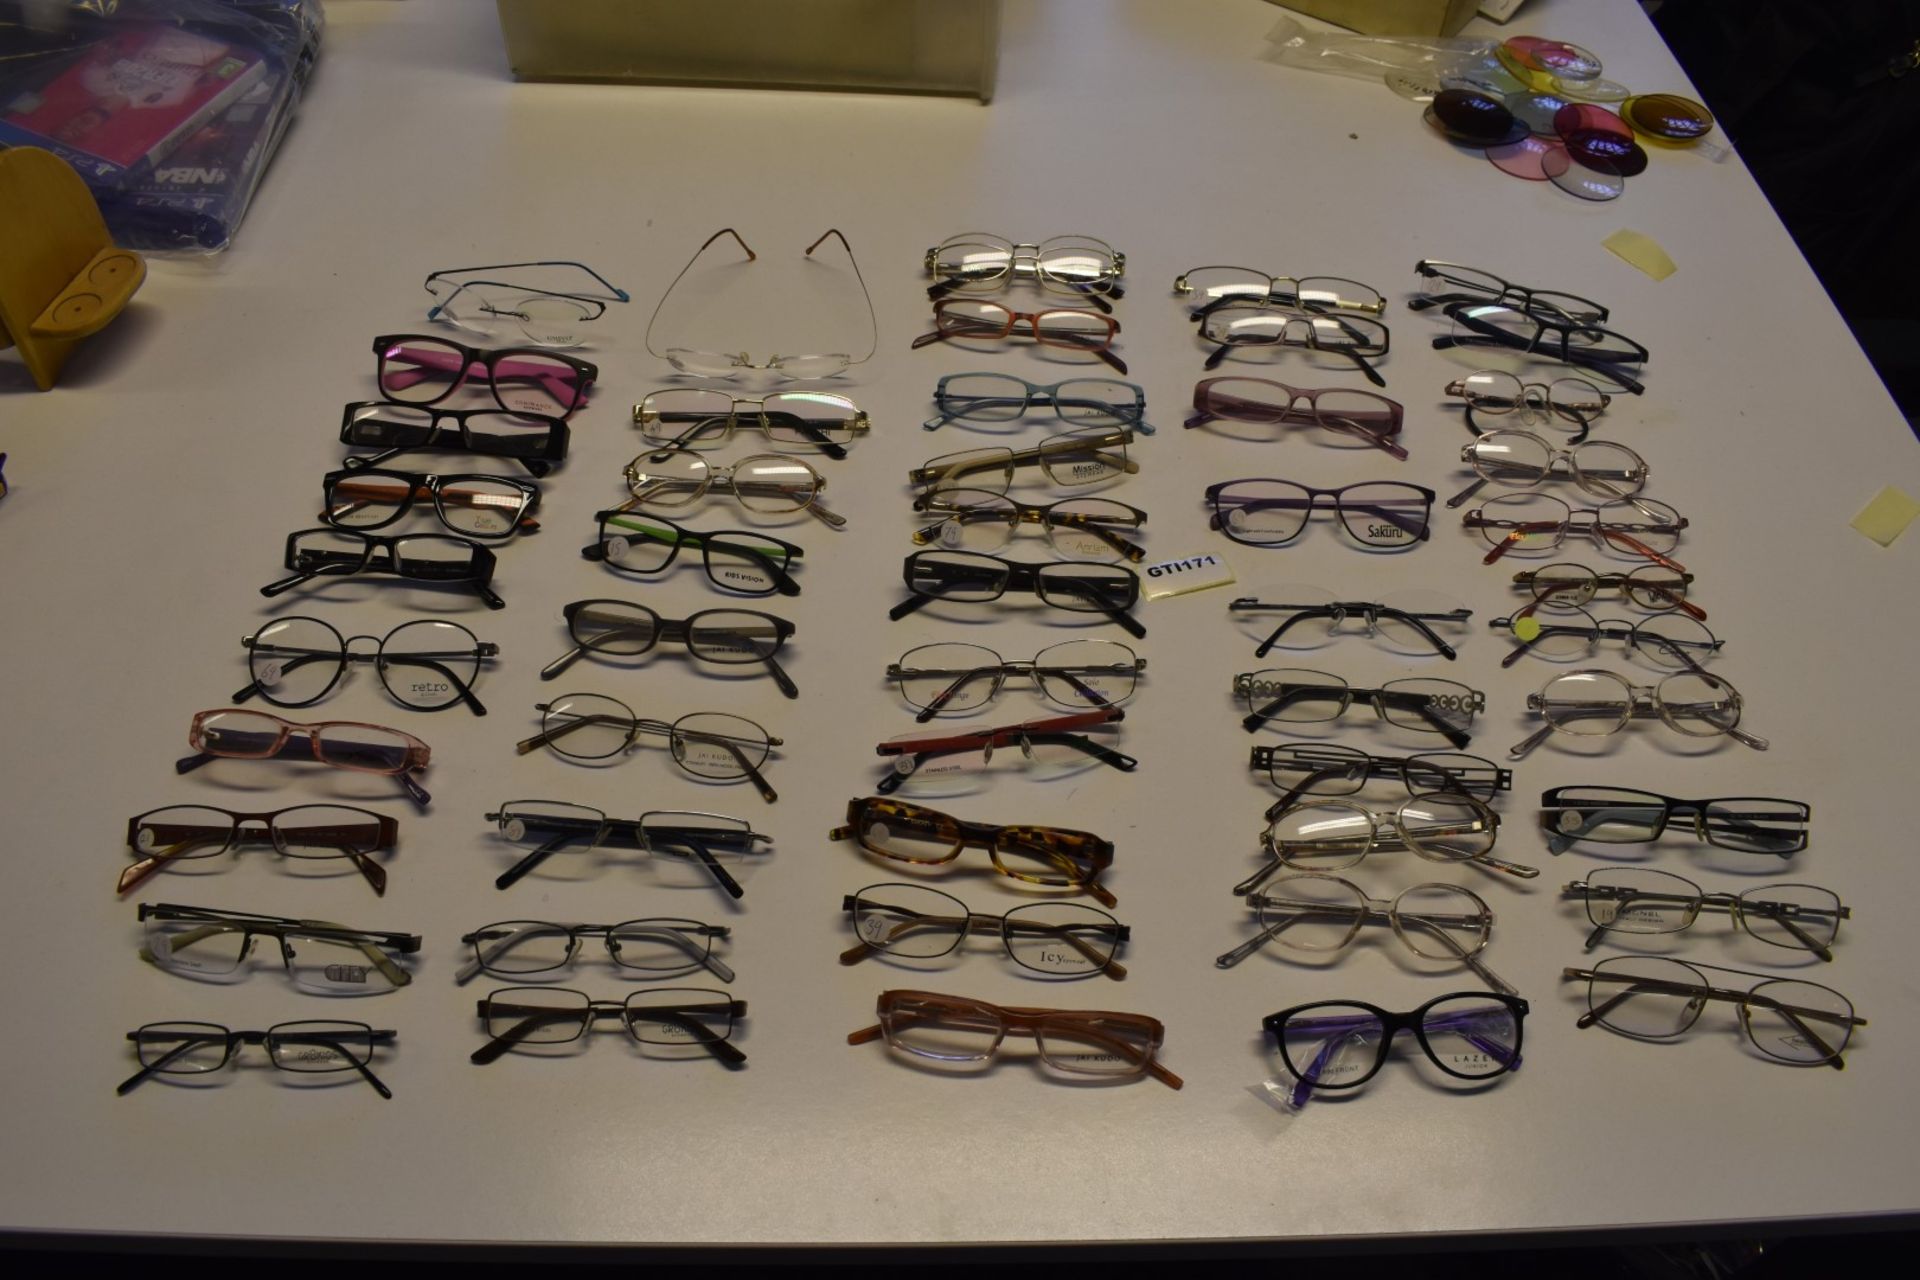 50 x Assorted Pairs of Spectacle Eye Glasses - New and Unused Stock - Various Designs and Brands - Image 14 of 19